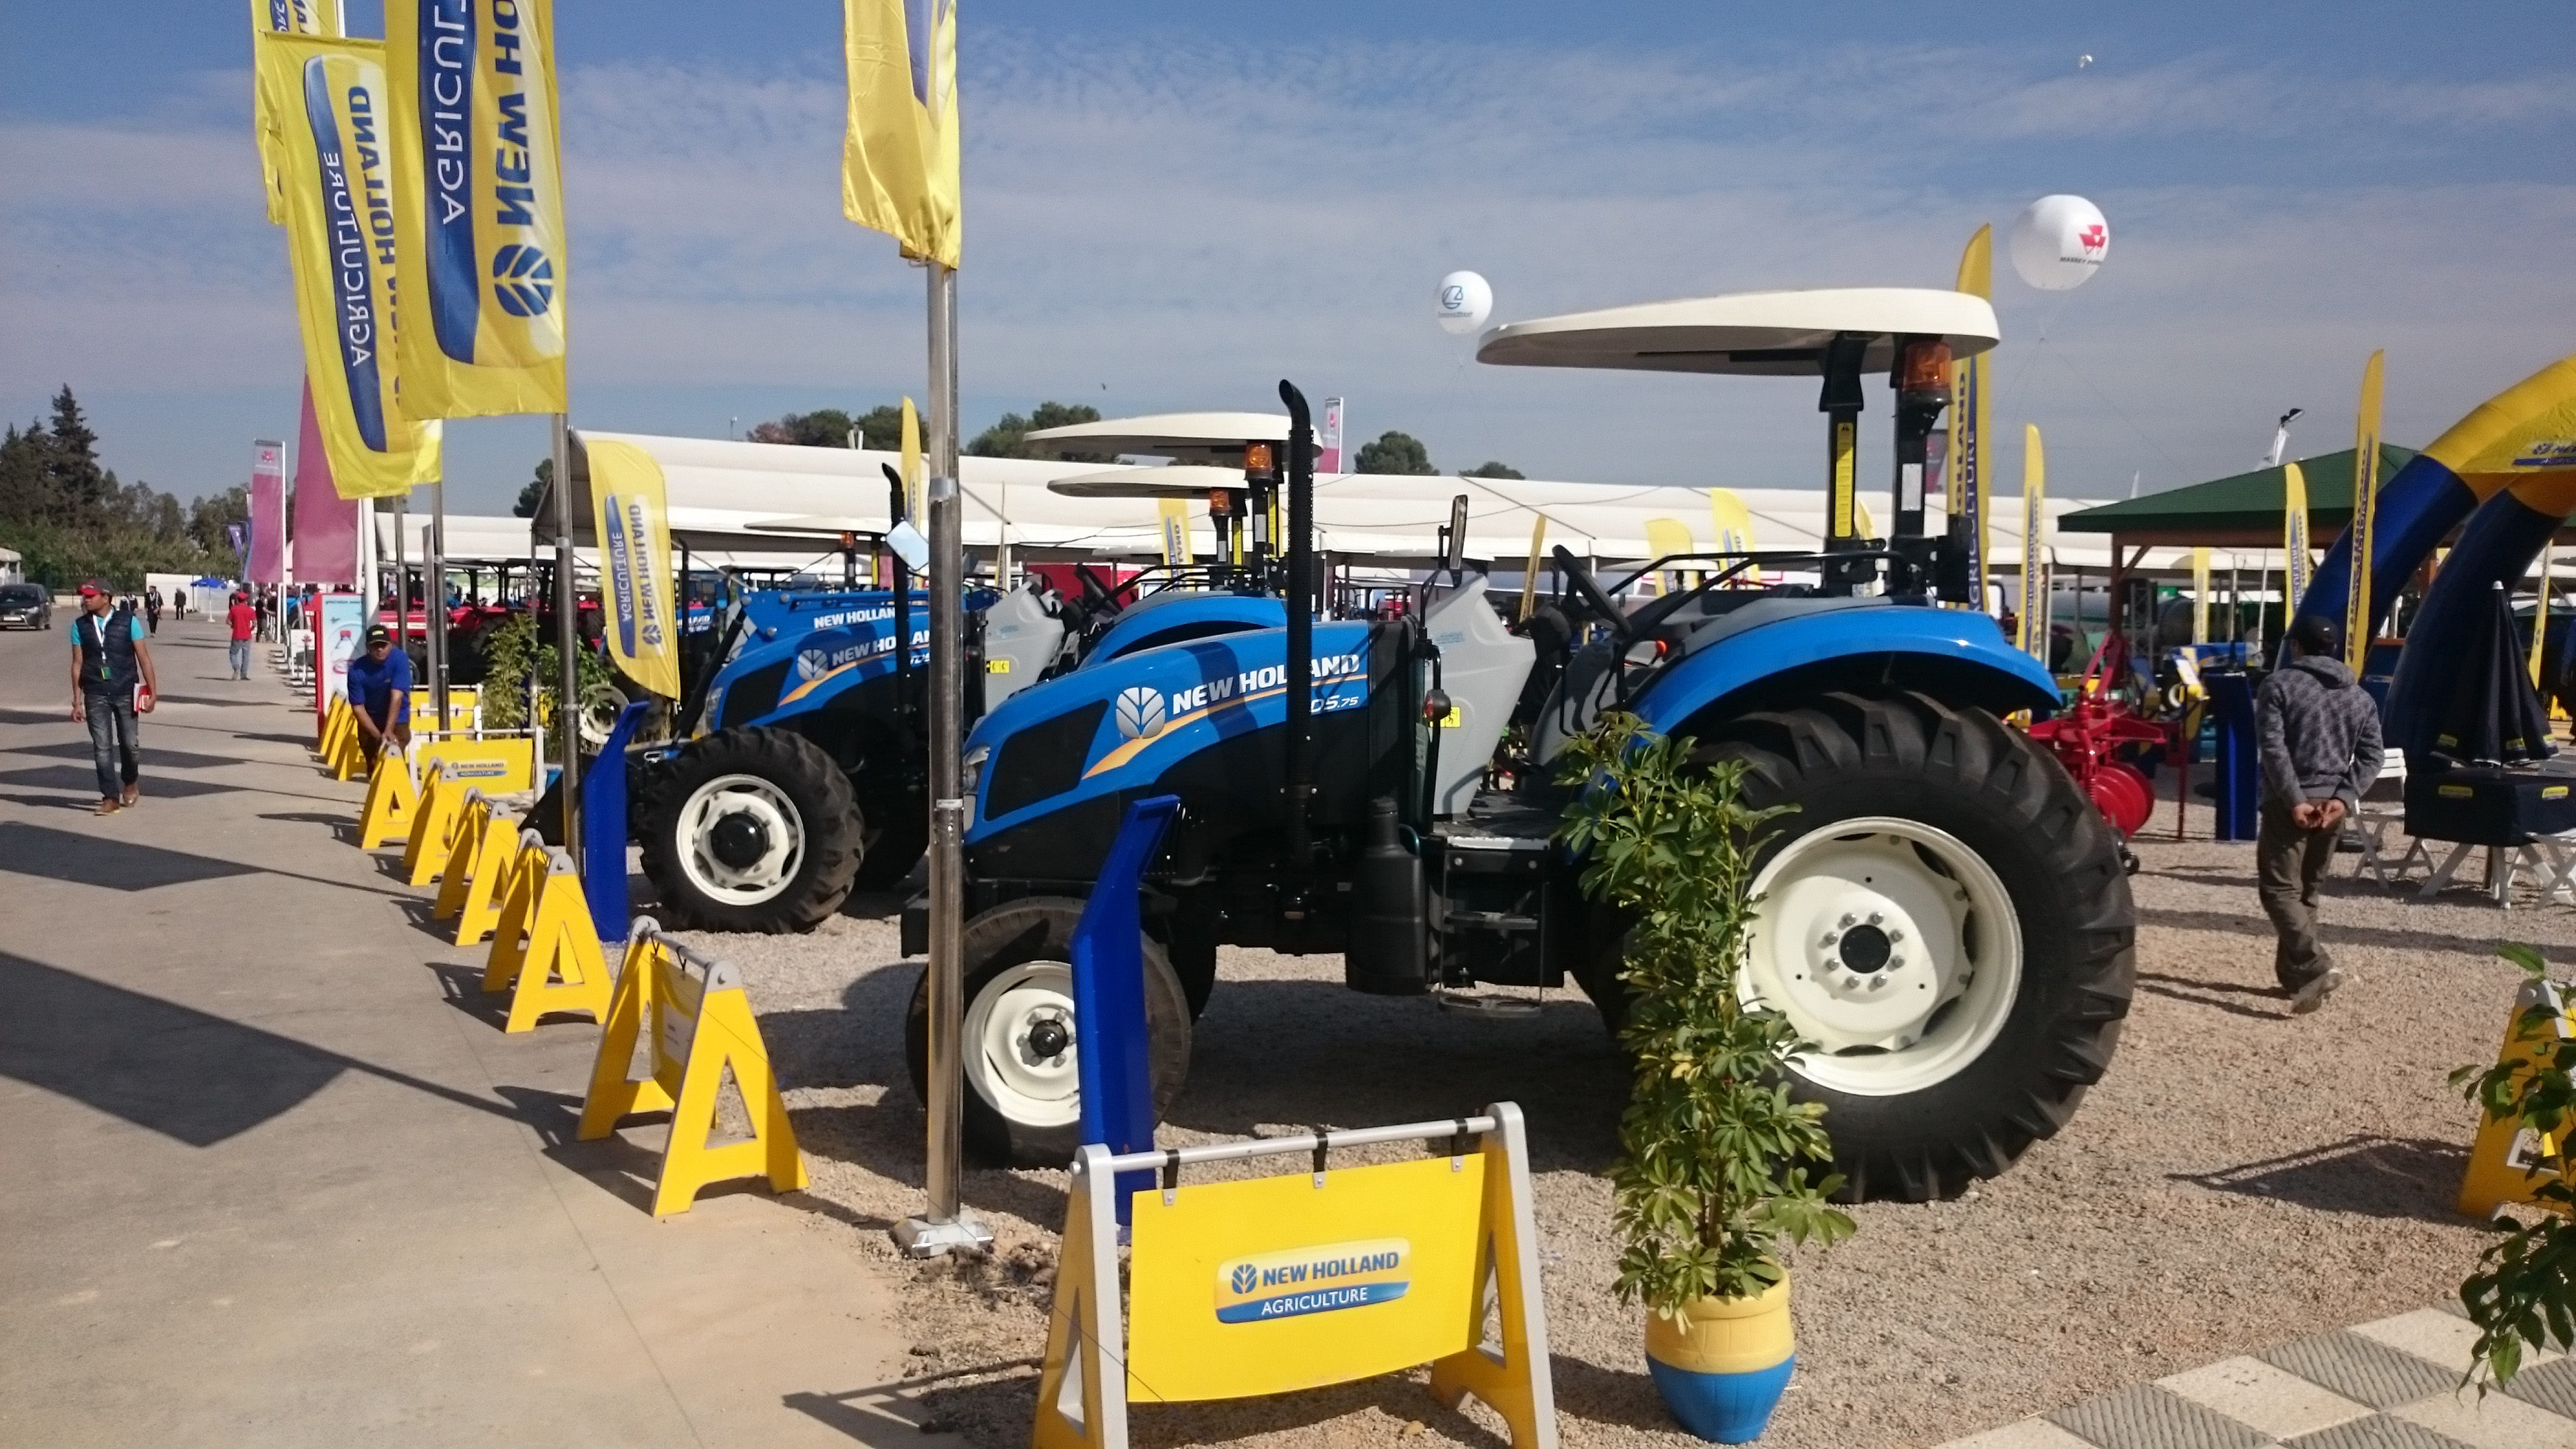 NEW HOLLAND AGRICULTURE SHOWCASED ITS FUEL EFFICIENT FARMING SOLUTIONS AT SIAM SHOW IN MOROCCO